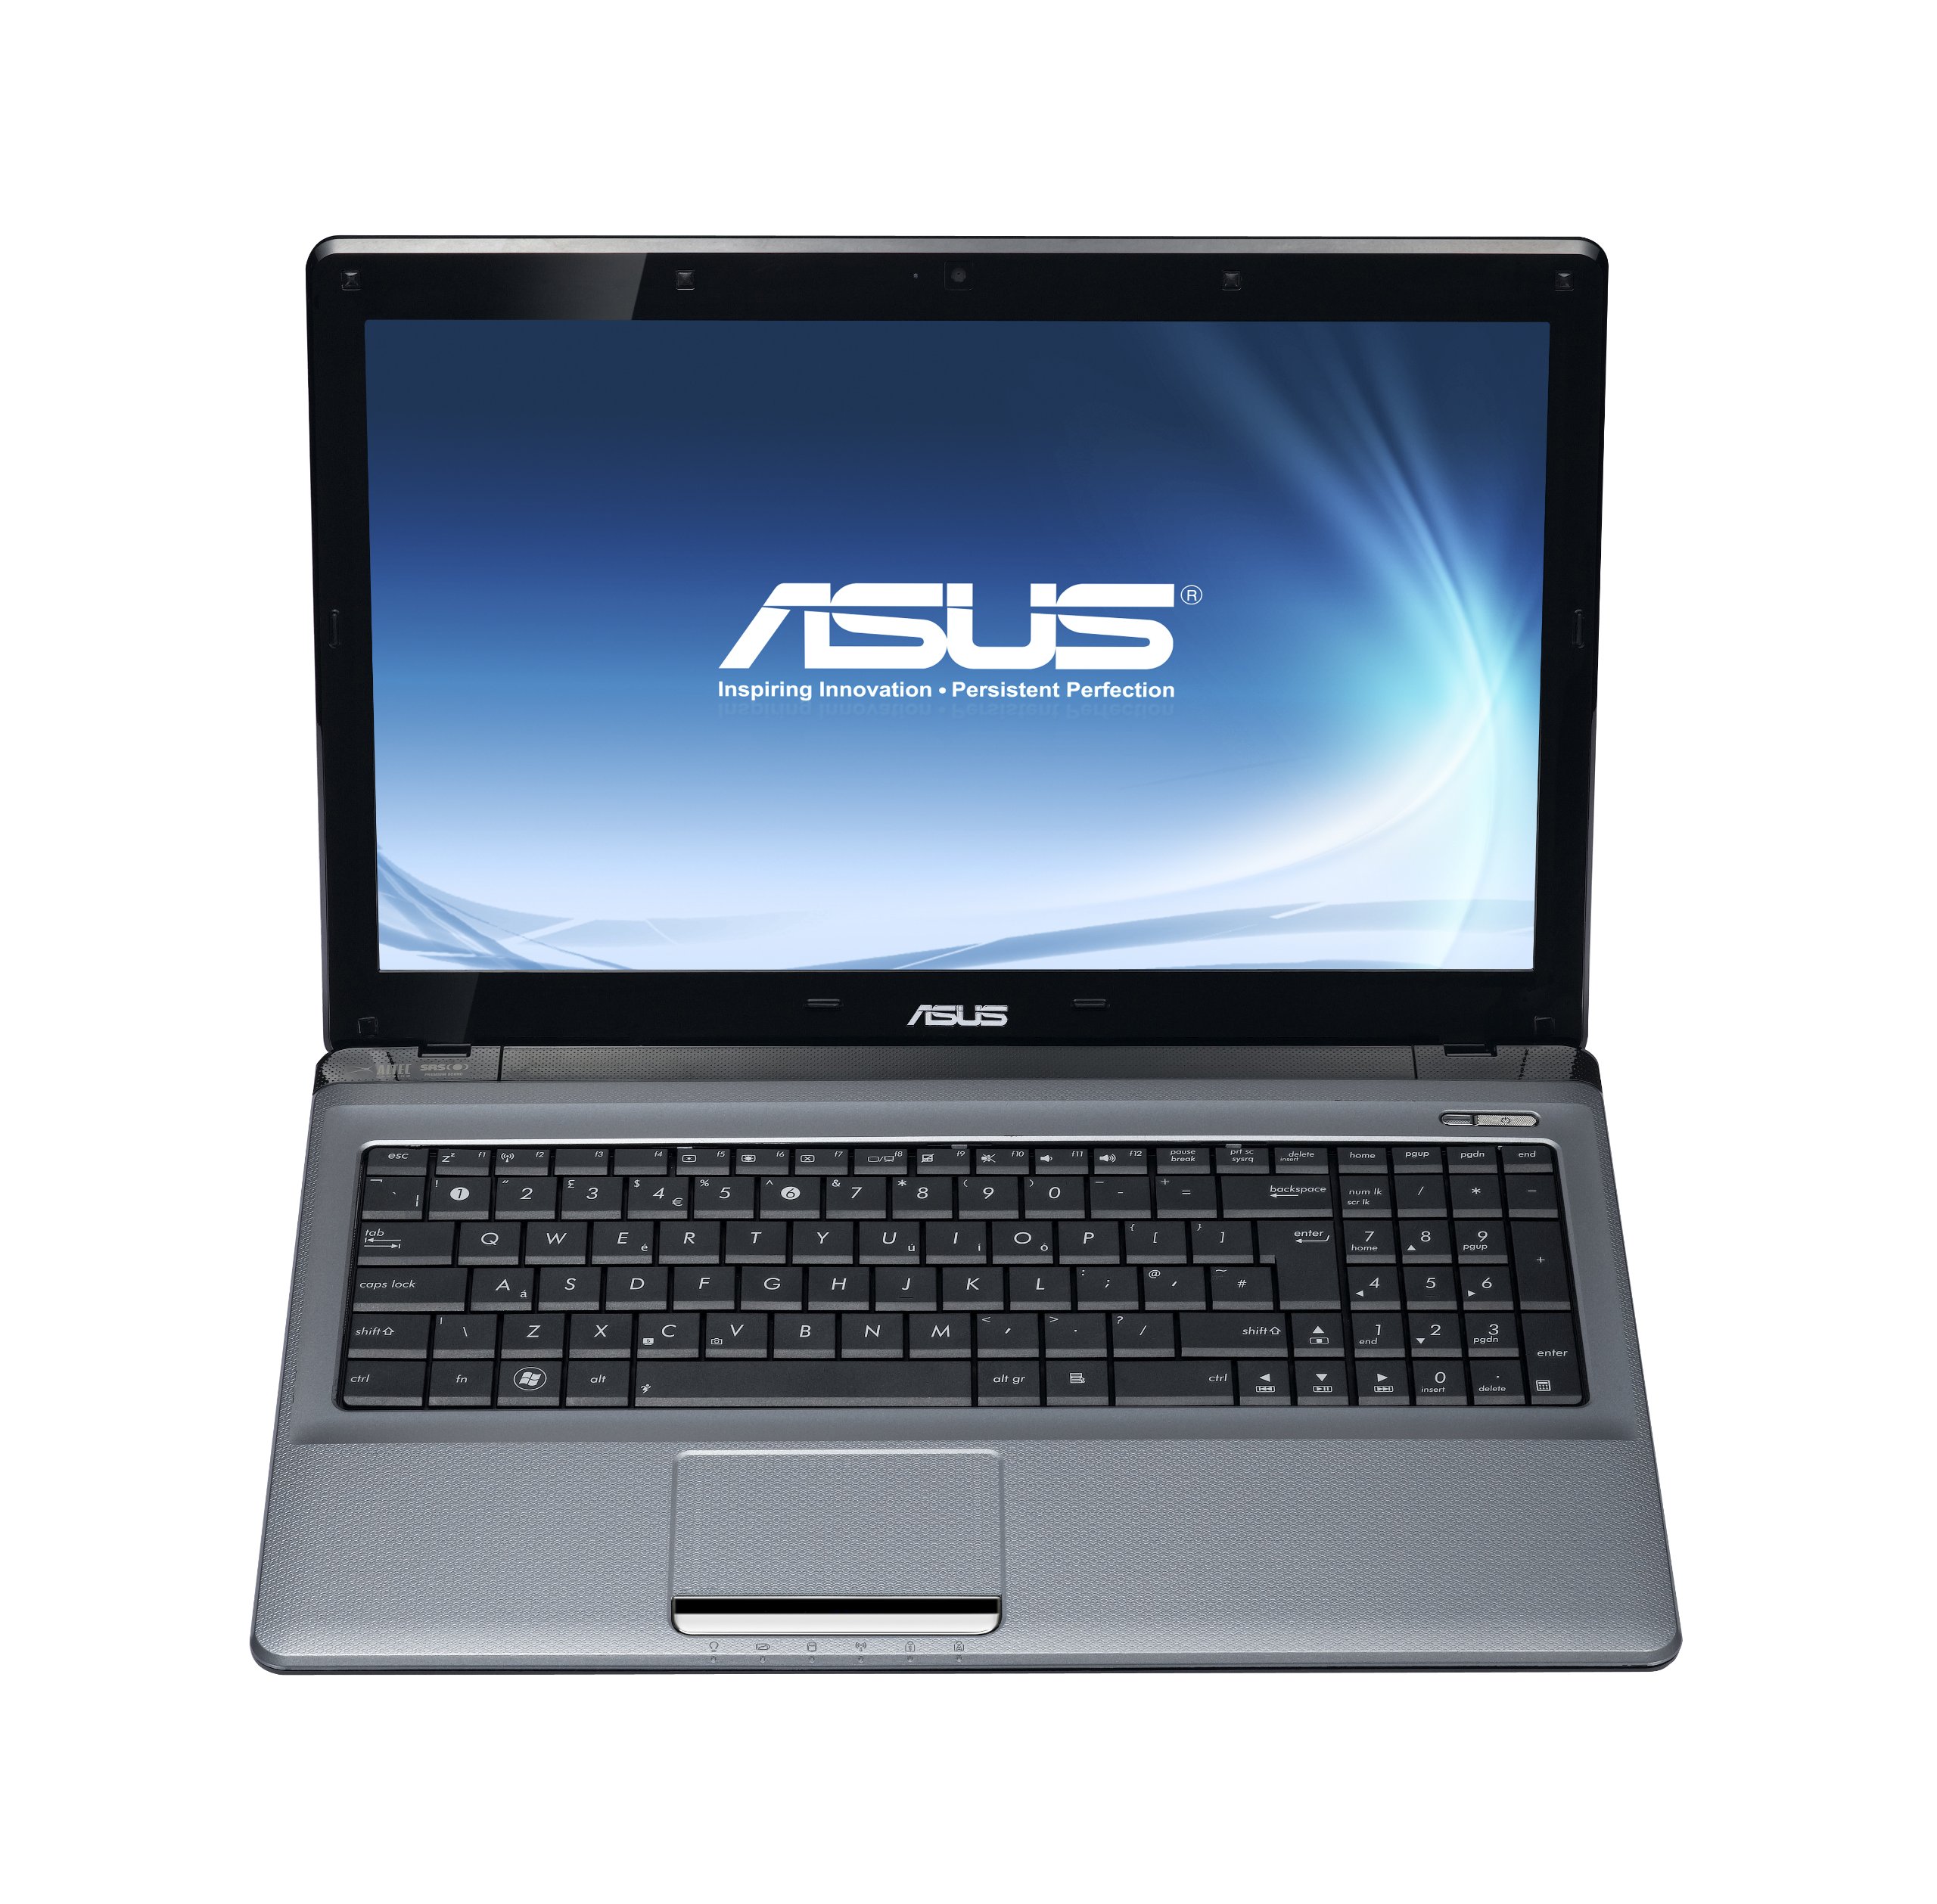 Asus A93SV Notebook